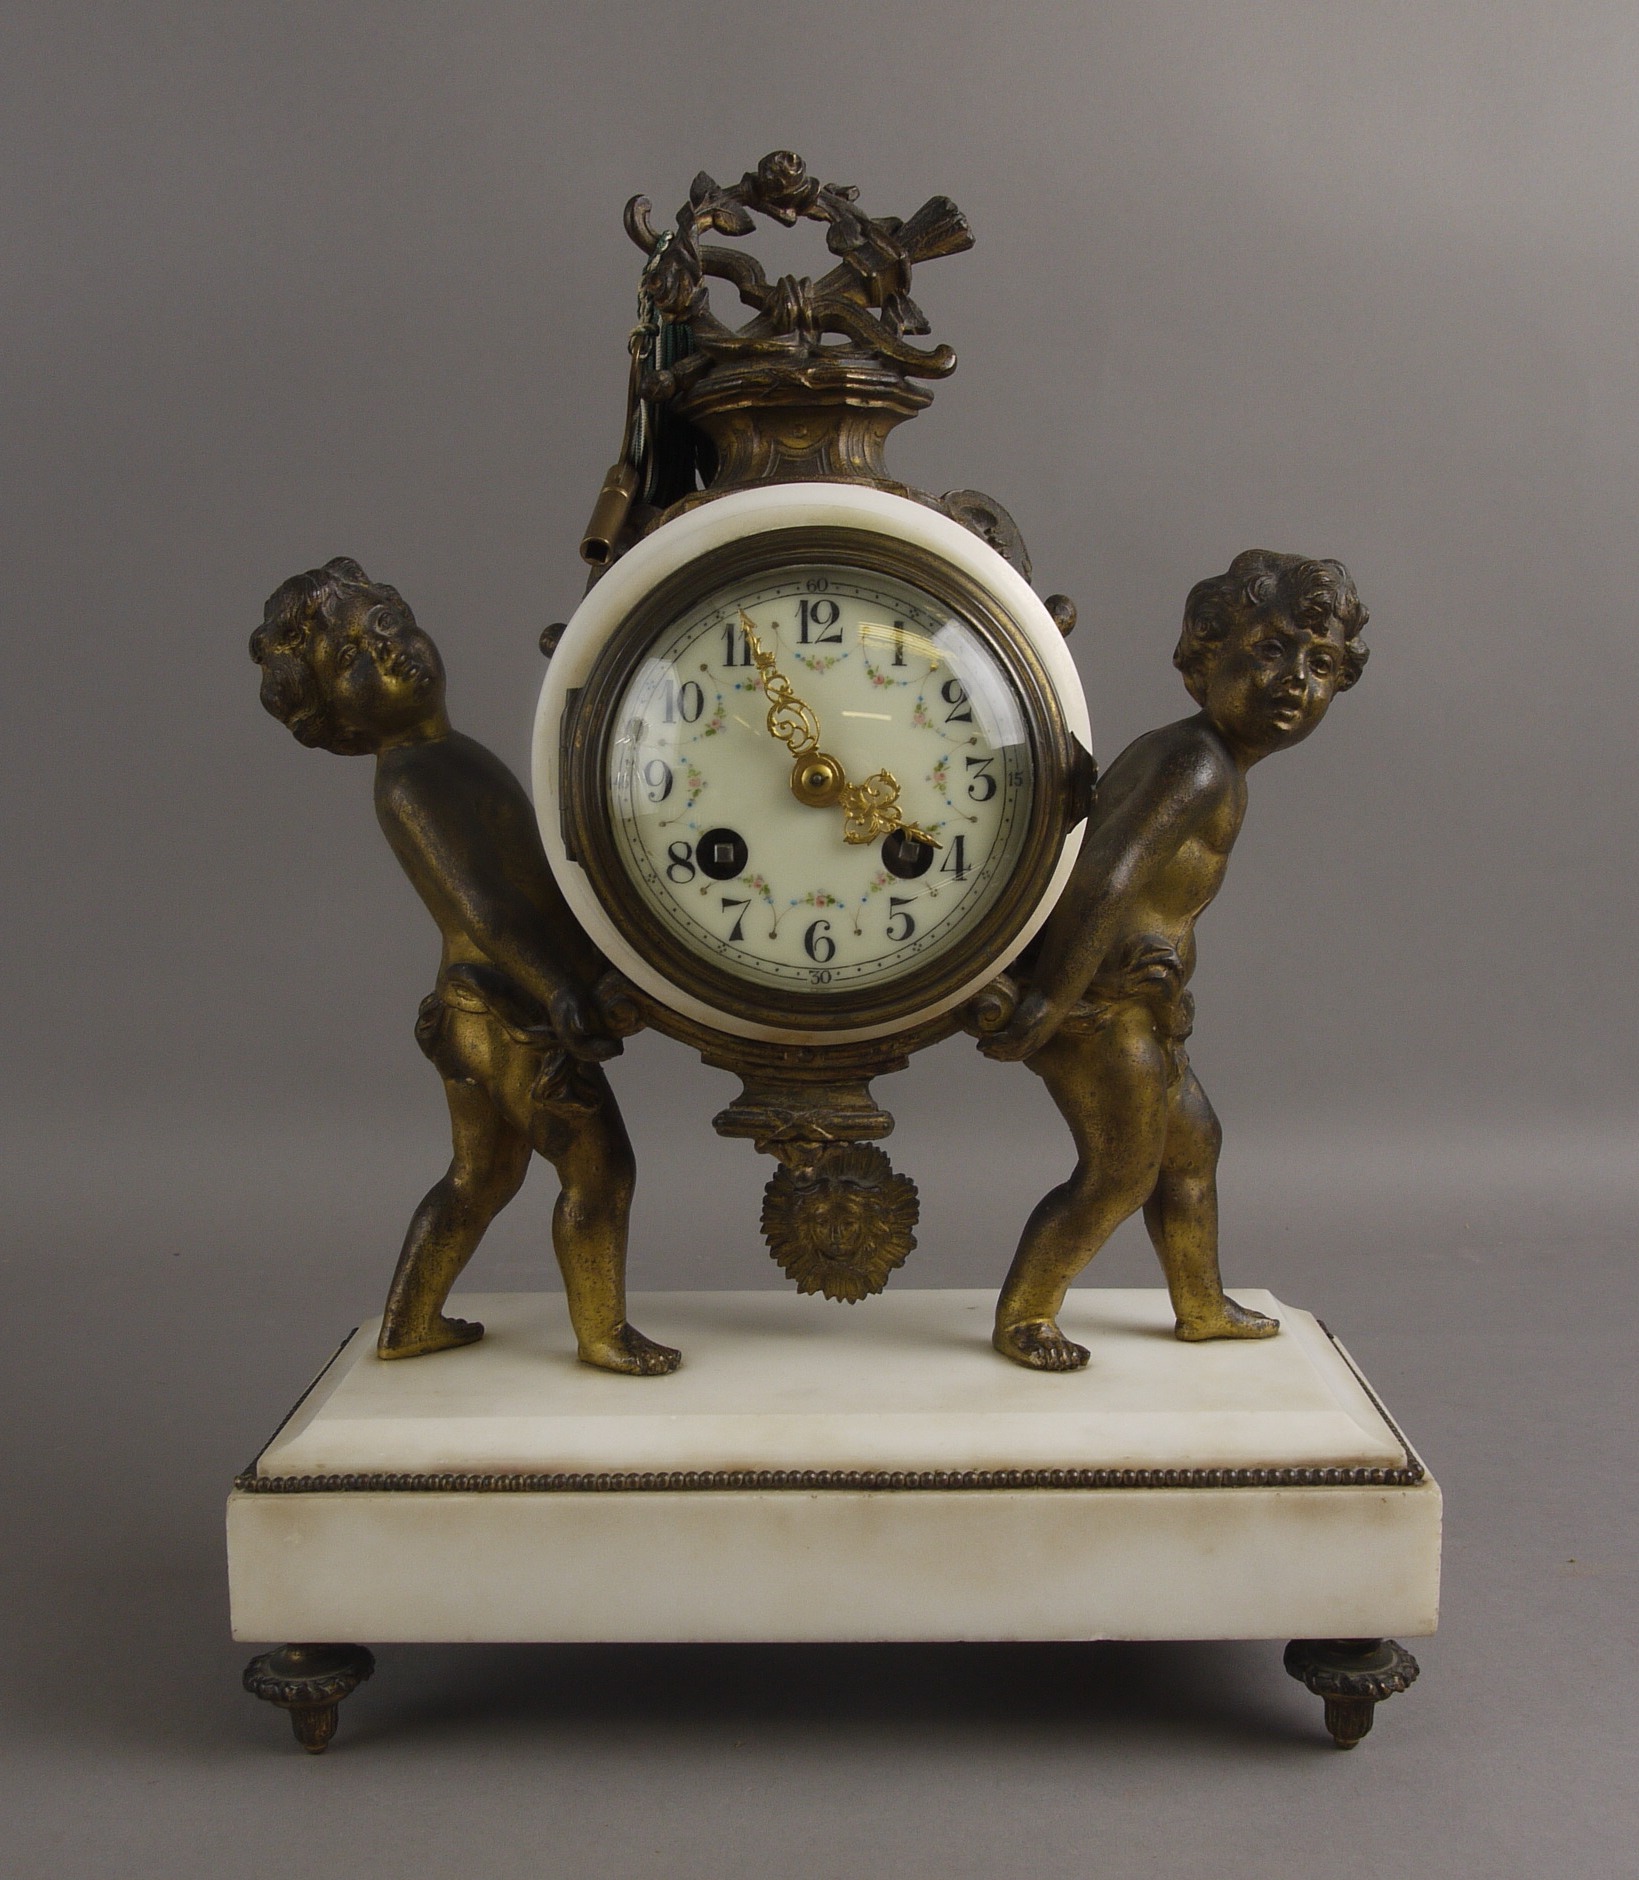 A LATE 19TH CENTURY FRENCH MANTEL CLOCK IN THE LOUIS XV MANNER, the Mougin cylinder movement with